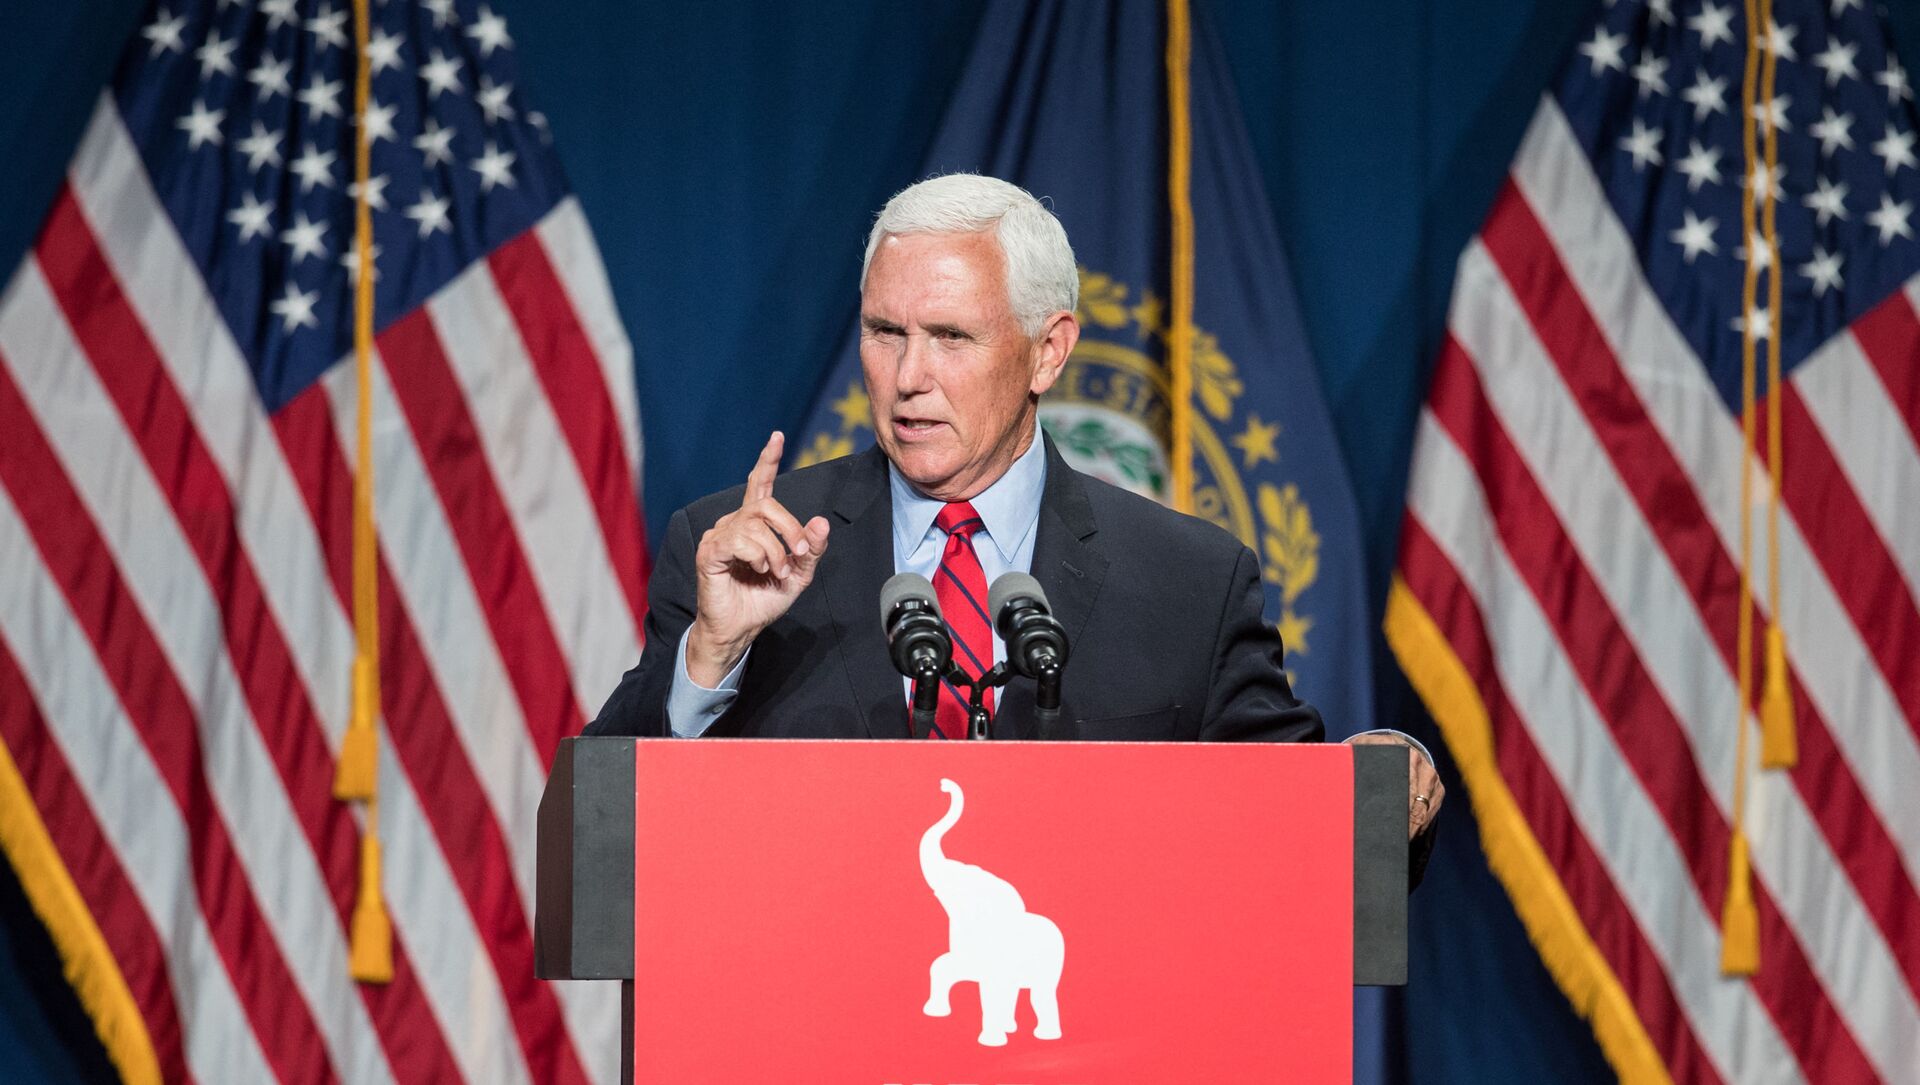 Former Vice President Mike Pence addresses the GOP Lincoln-Reagan Dinner on June 3, 2021 in Manchester, New Hampshire. Pence's visit to New Hampshire would be the first time back since he was Vice President.   - Sputnik International, 1920, 19.06.2021